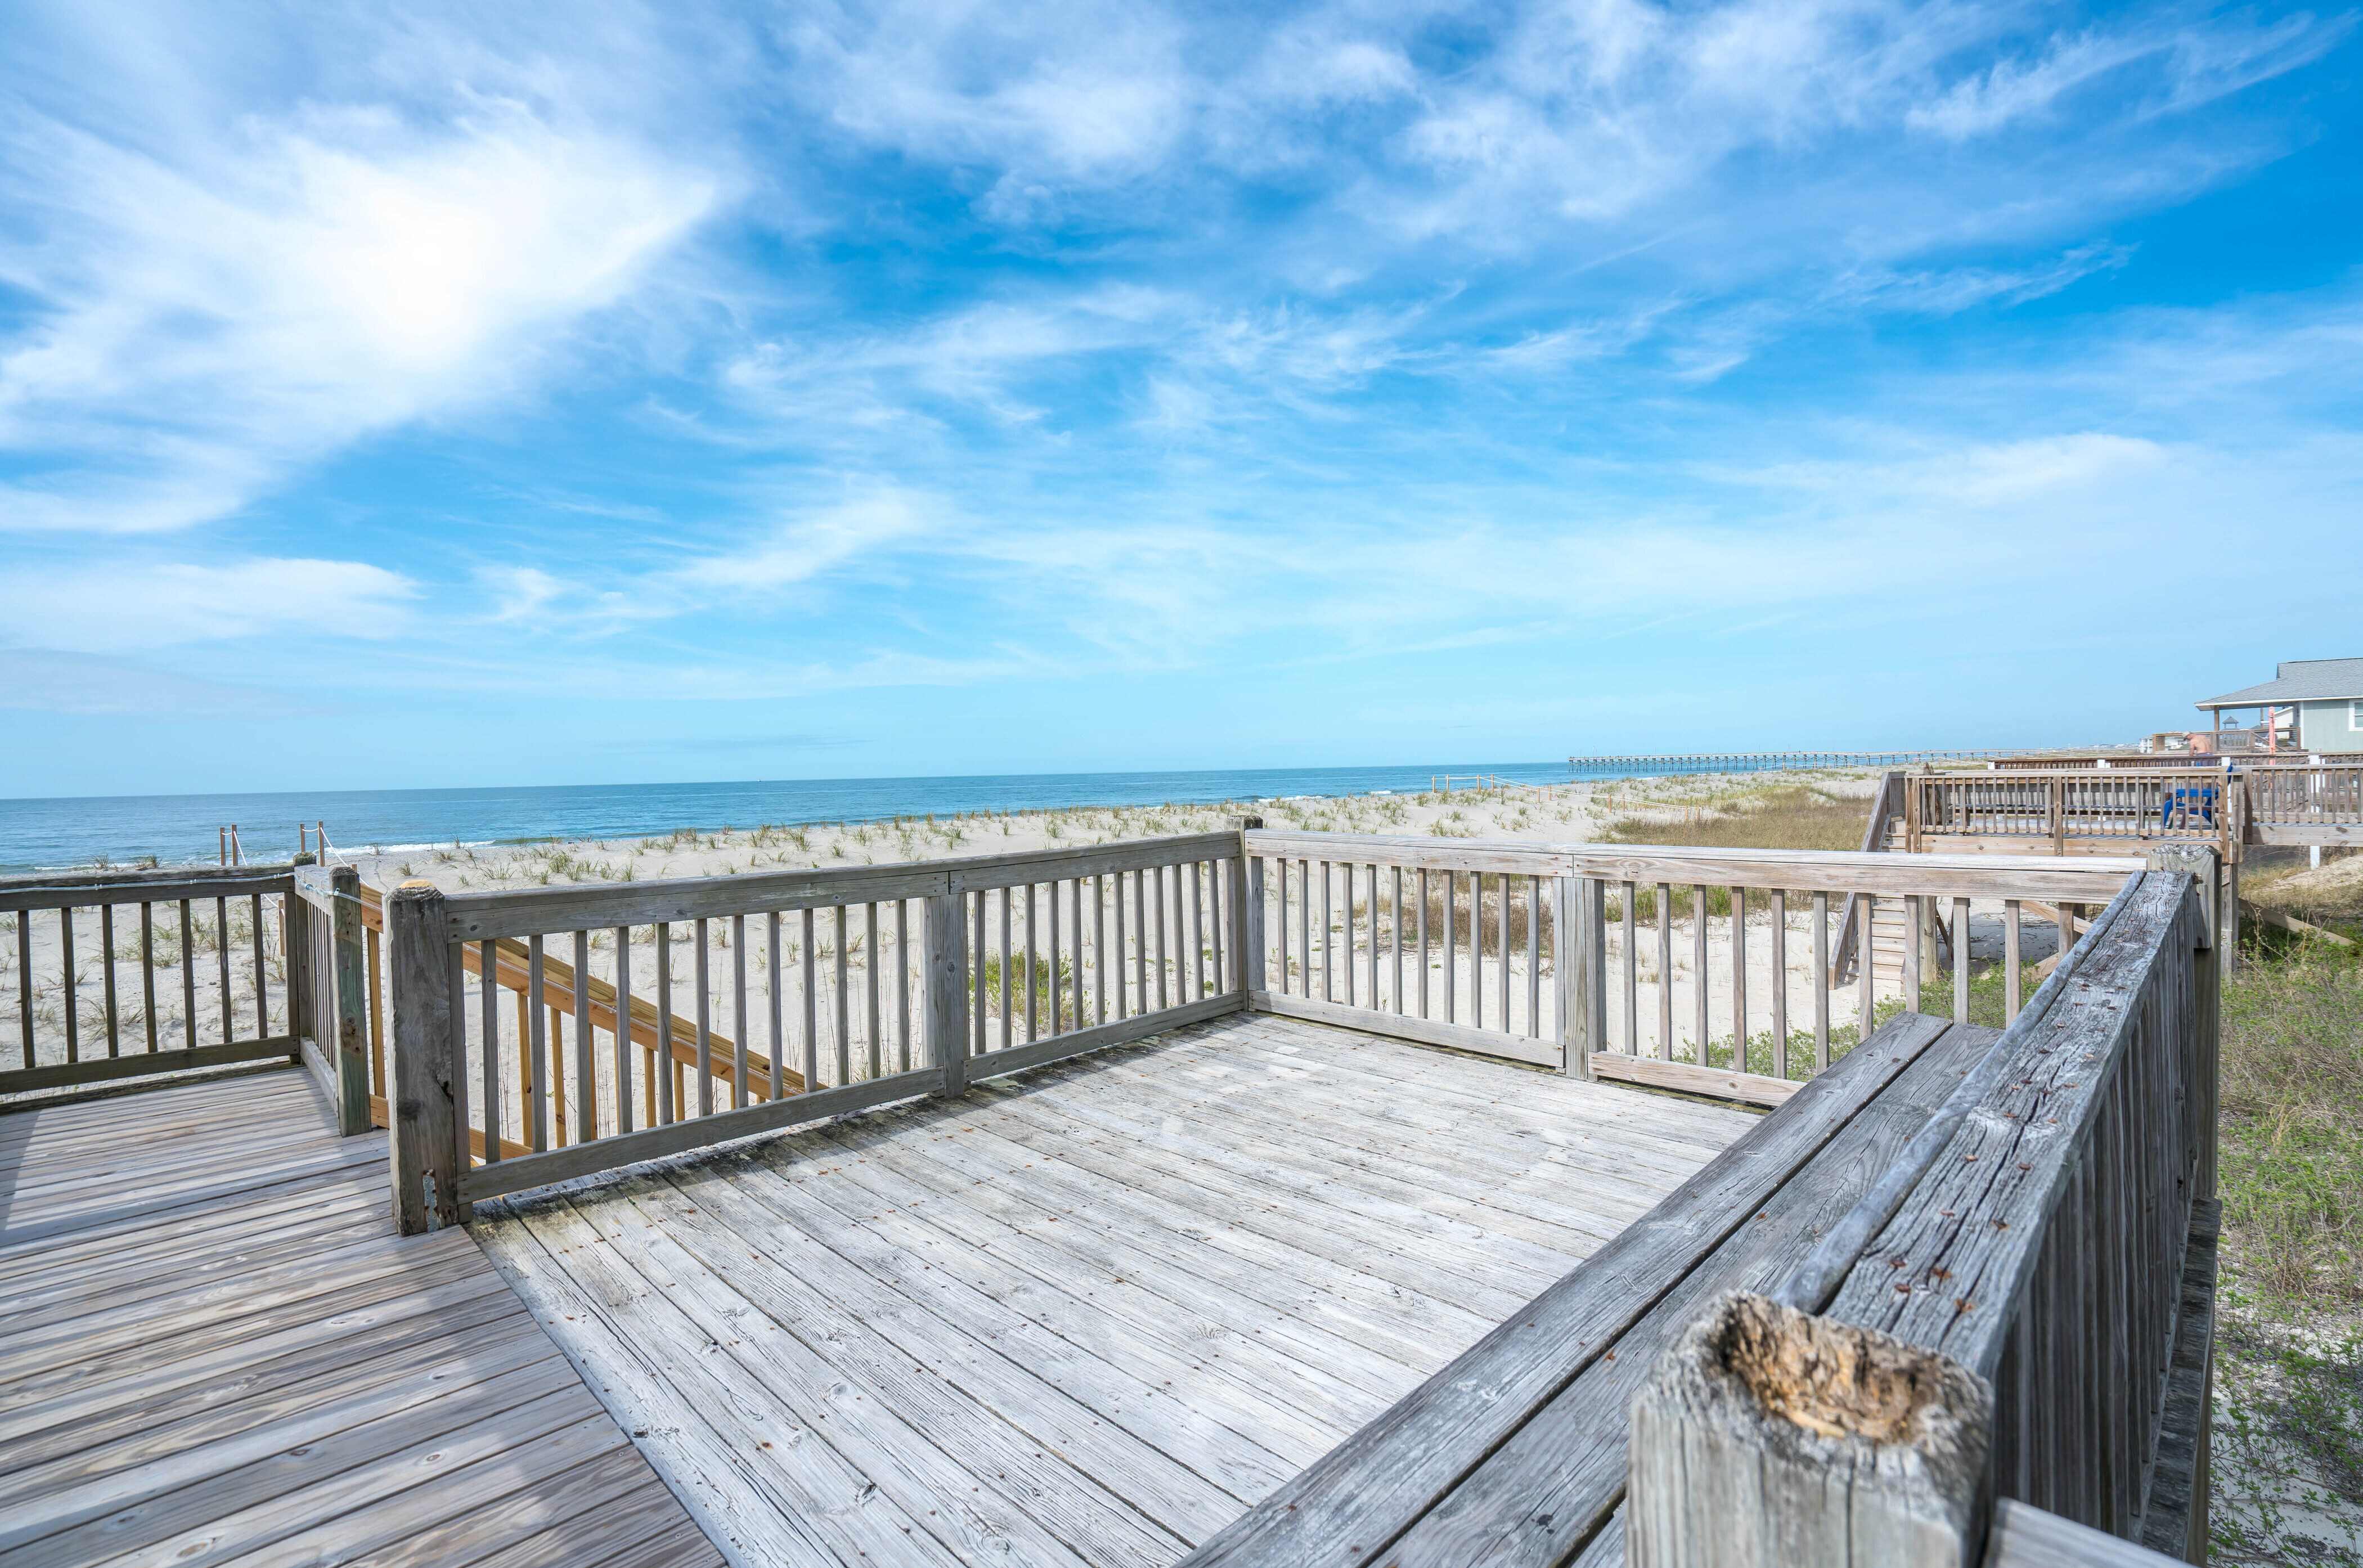 Private Boardwalk with Built-In Seating Overlooking Ocean Crest Pier